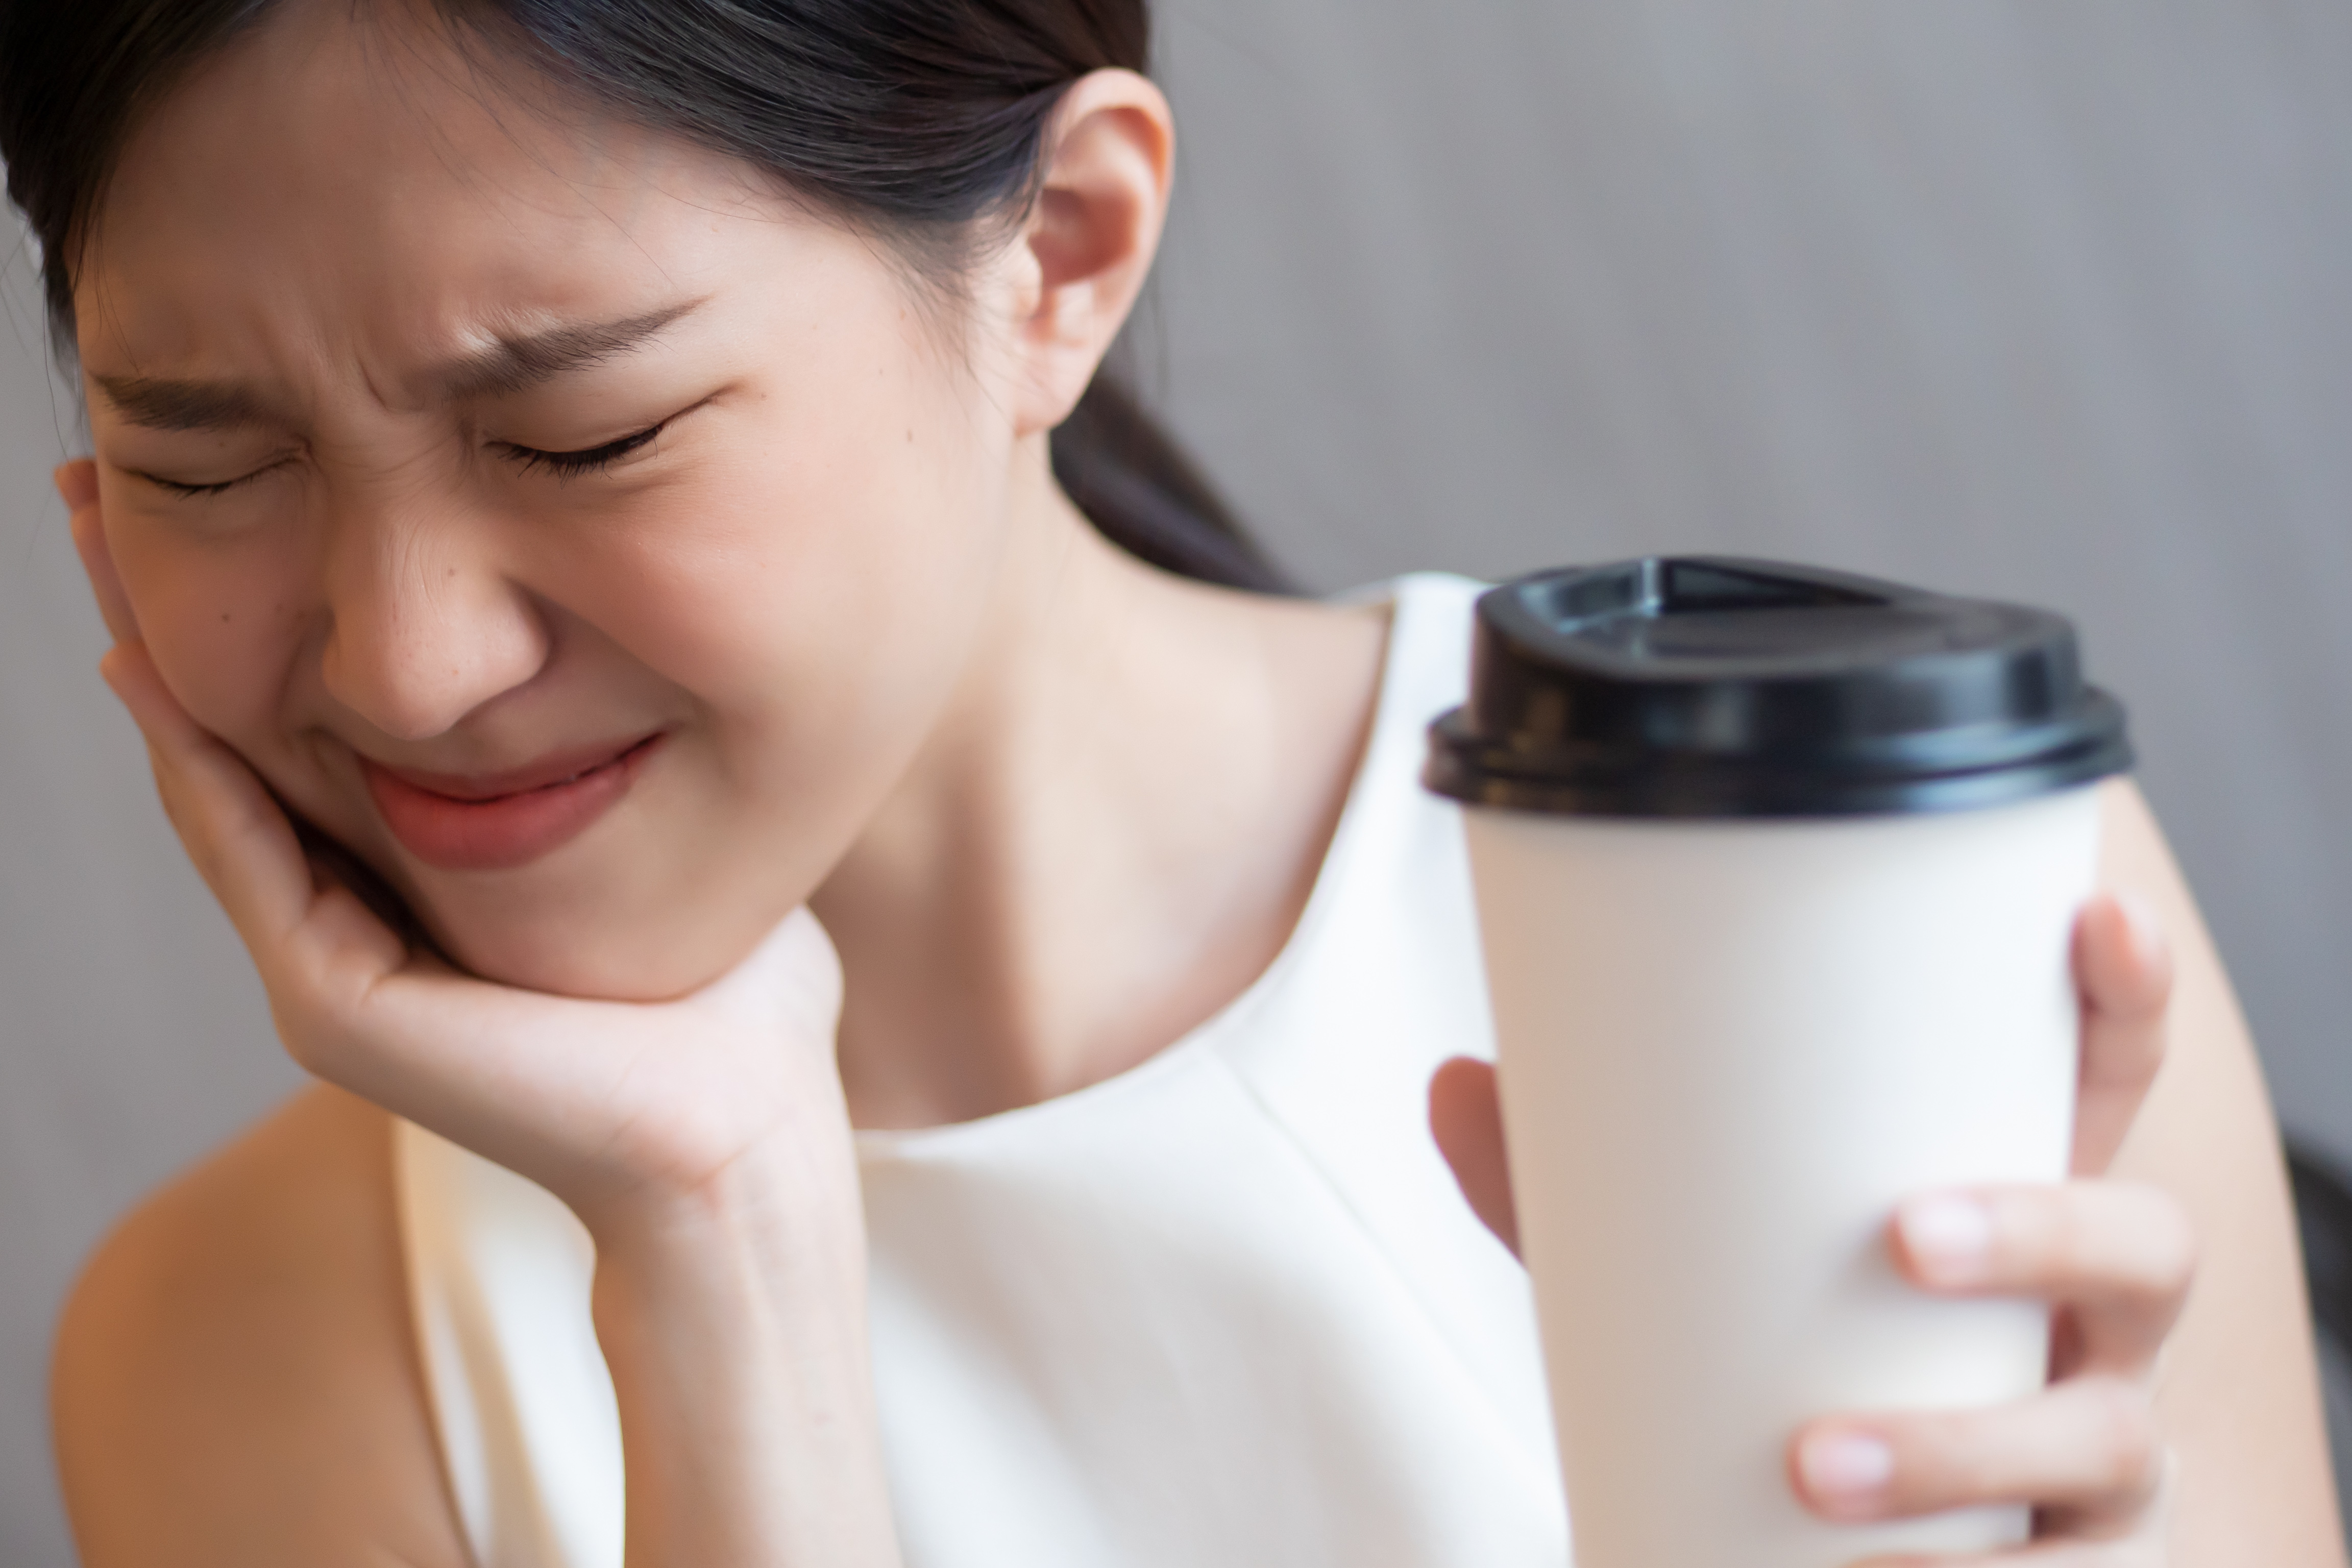 Asian woman holding a coffee cup has pain from a broken tooth.